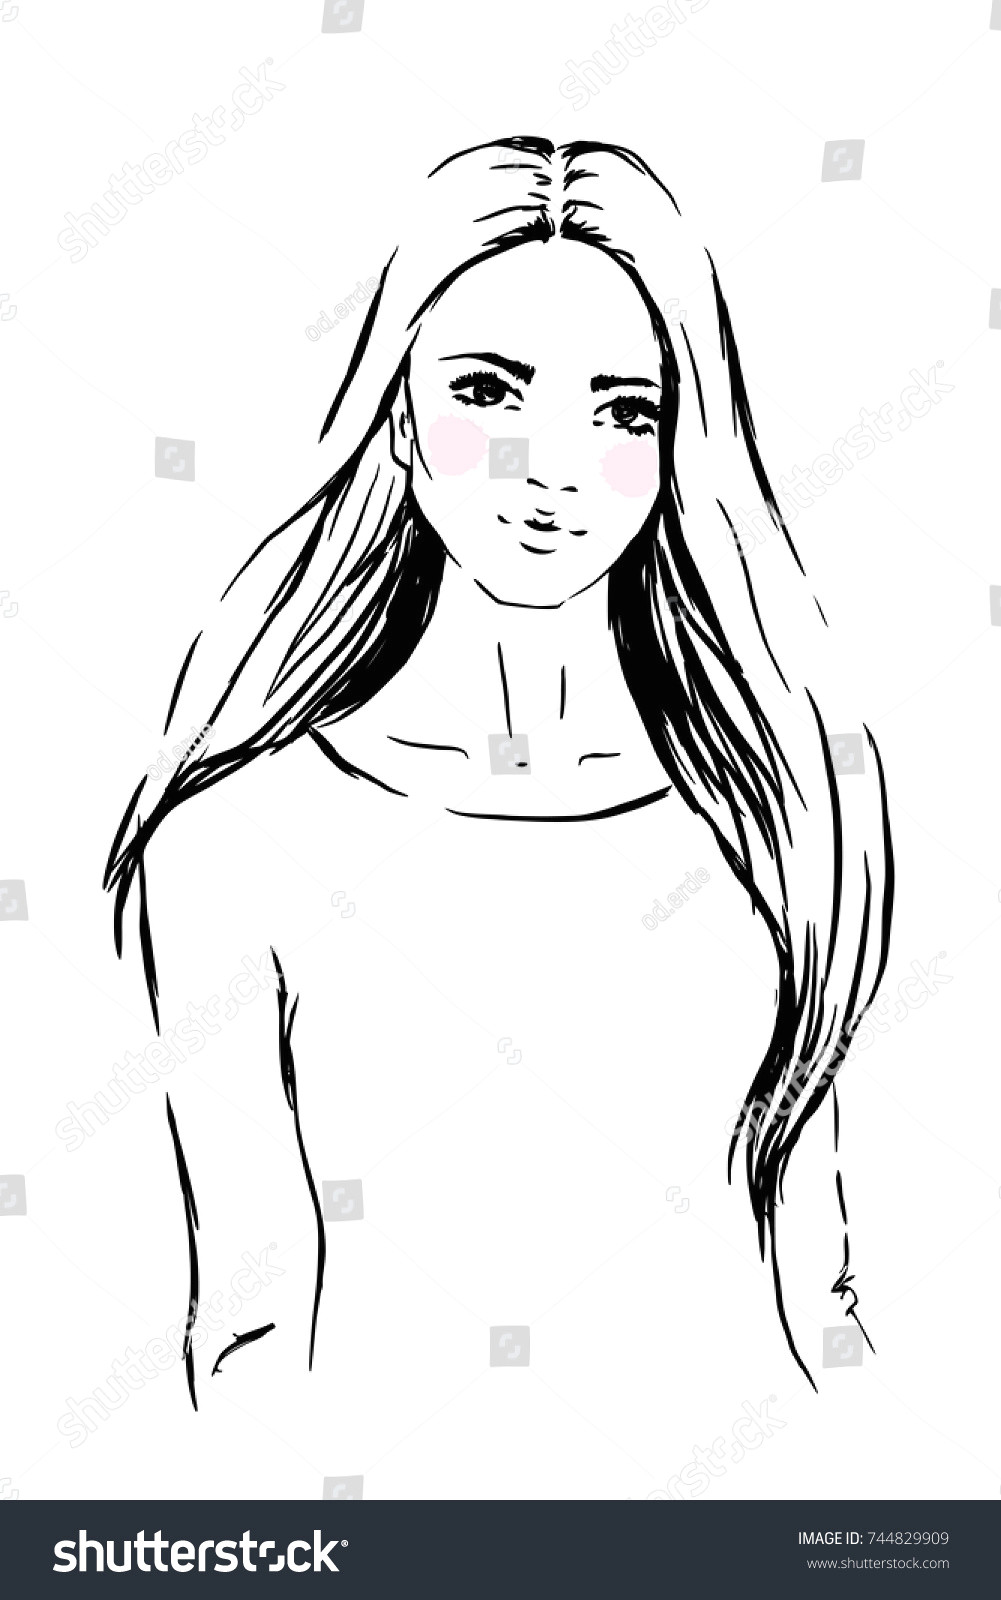 stock vector face woman sketch long hair fashion portrait vector illustration black lines isolated on white 744829909 jpg